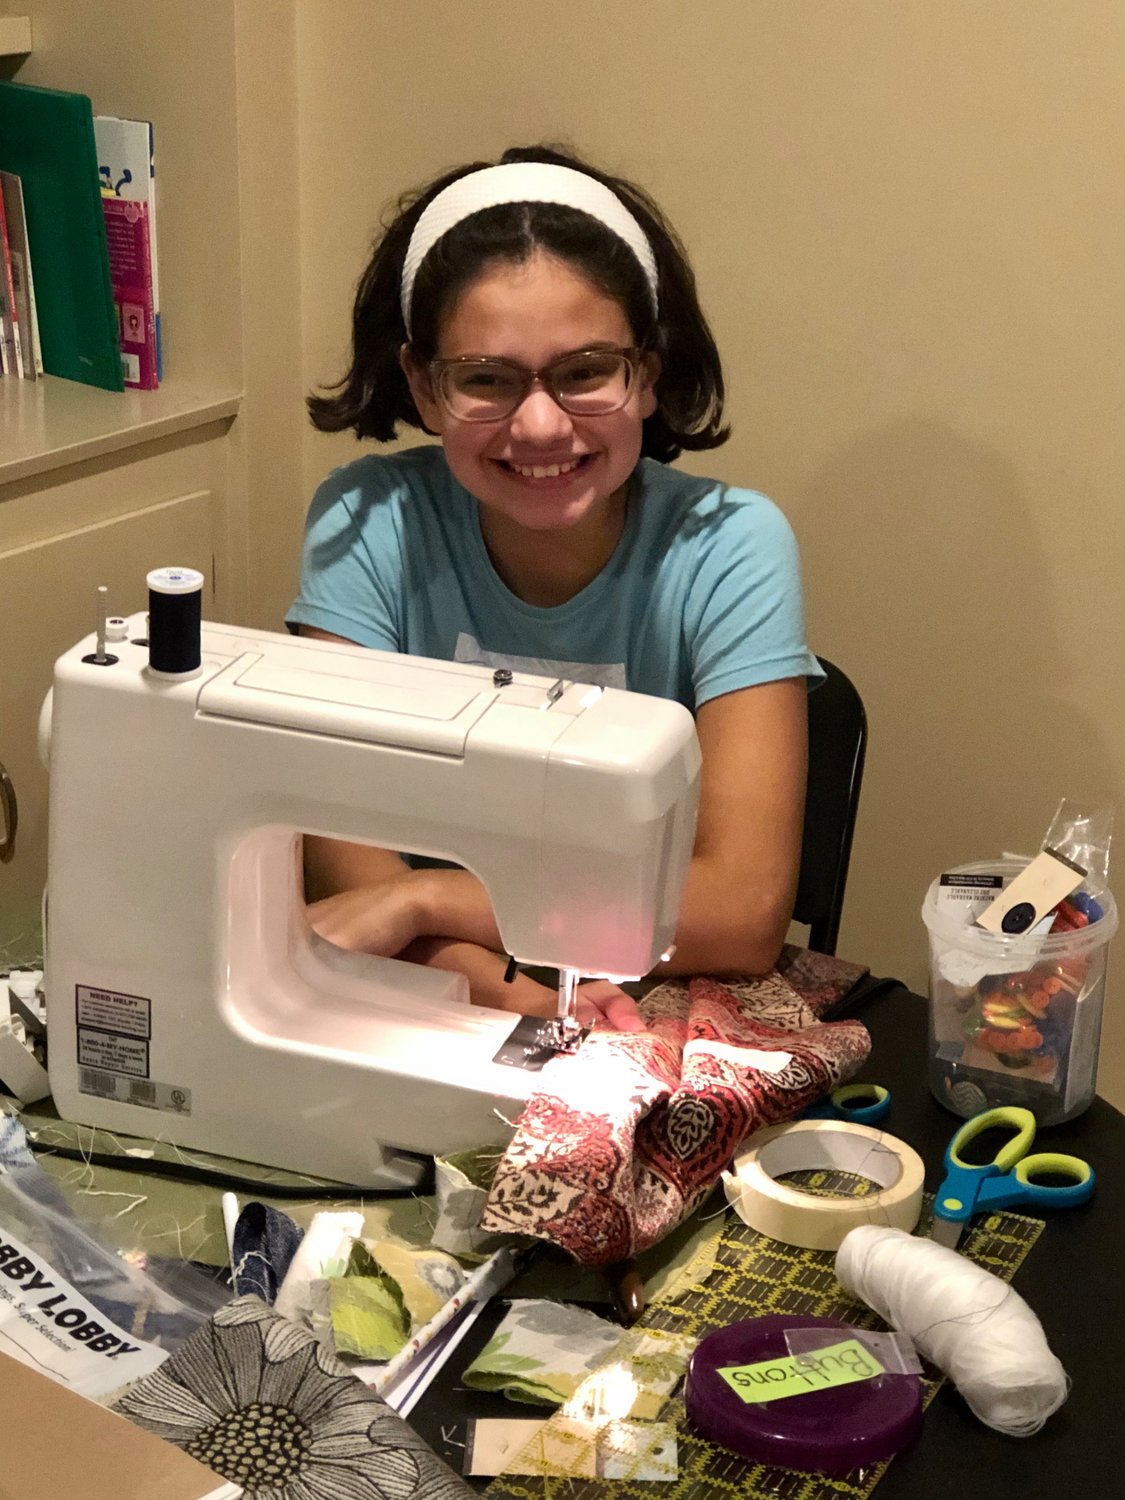 Barrington's Lizzie Bahena takes a short break from sewing to pose for a photograph. Lizzie has been very busy these last few months making bags, purses and wristlets as part of a Confetti Kids fund-raiser.